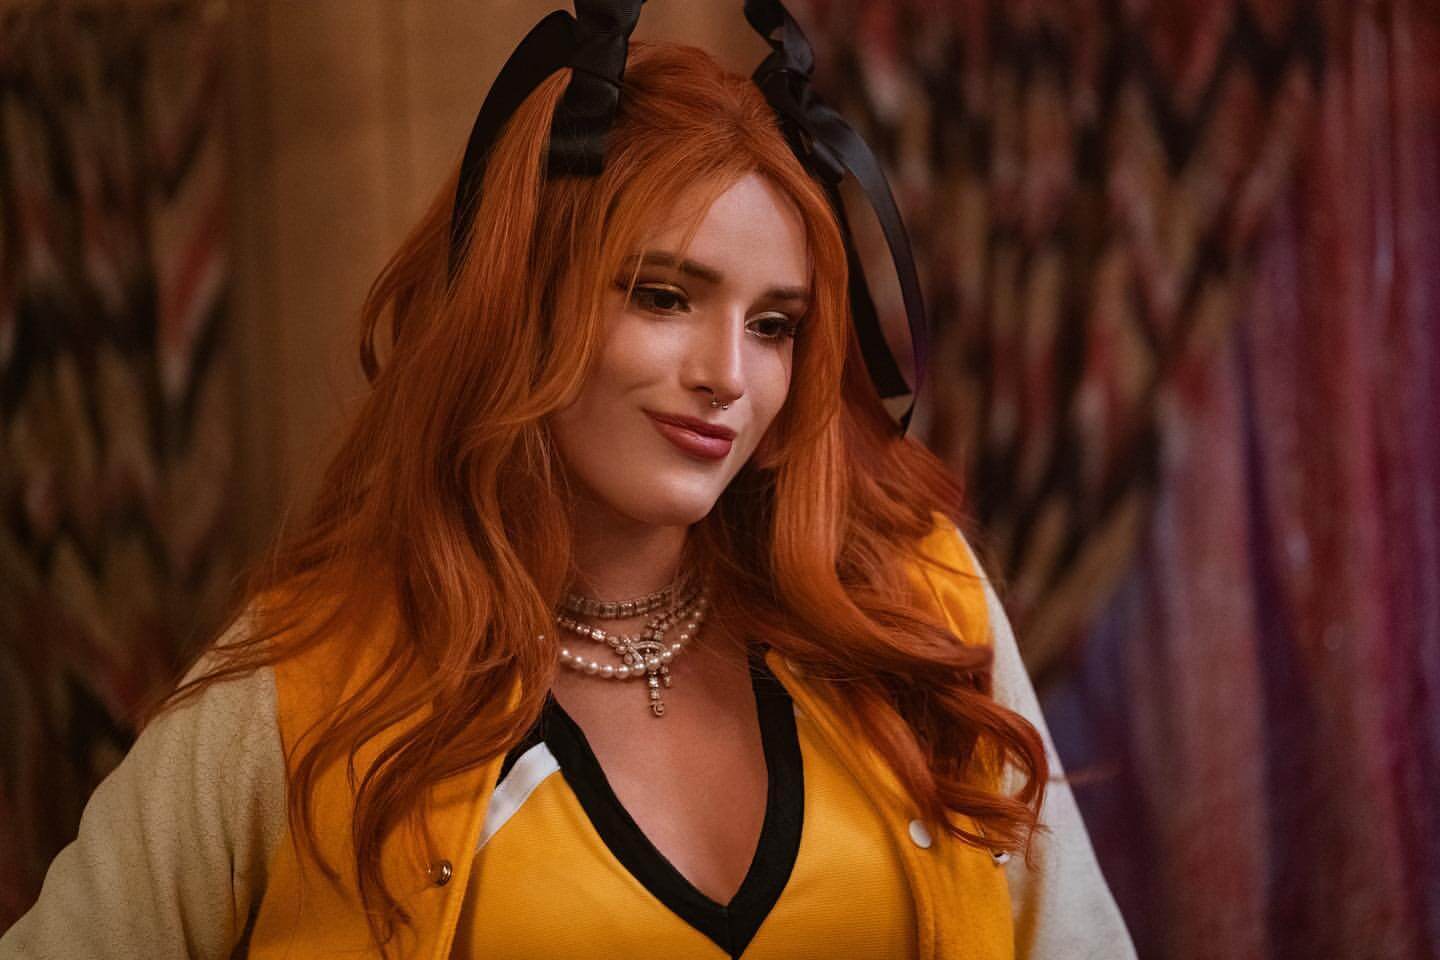 The Babysitter actress Bella Thorne cast in Saint Clare